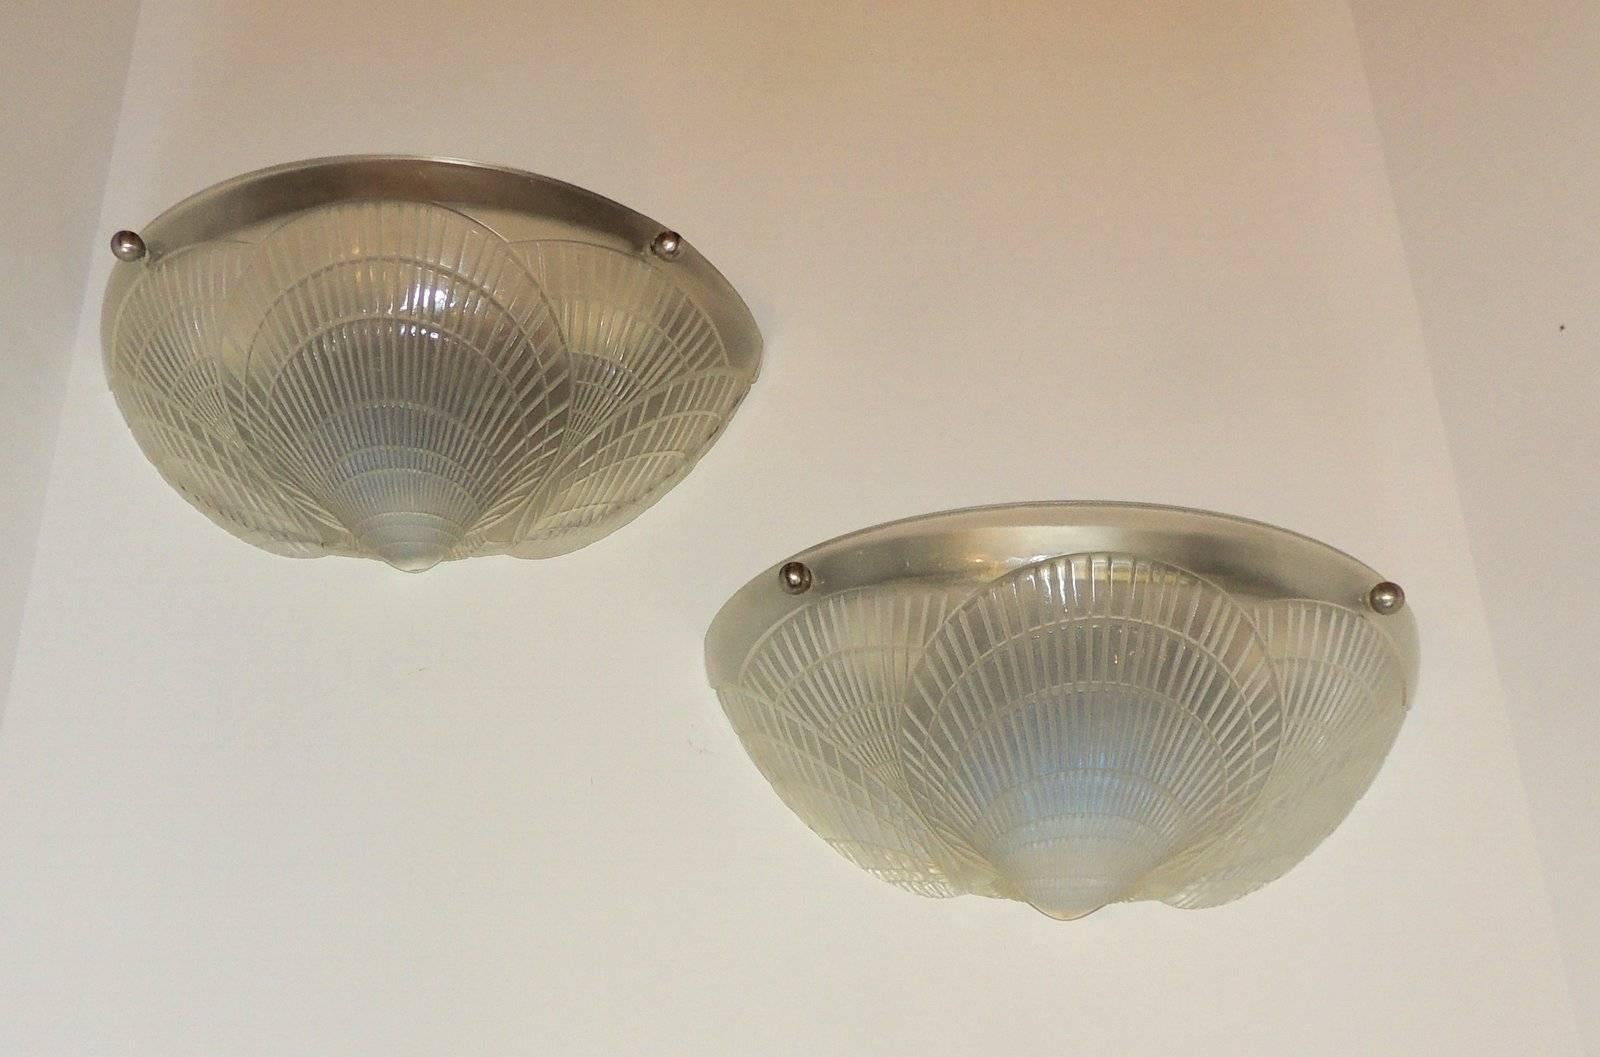 A wonderful pair of Lalique style frosted single coquille two-light molded opalescent Art Deco glass wall sconces

Measures: 5" D x 11 5/8" L x 5 5/8" W.